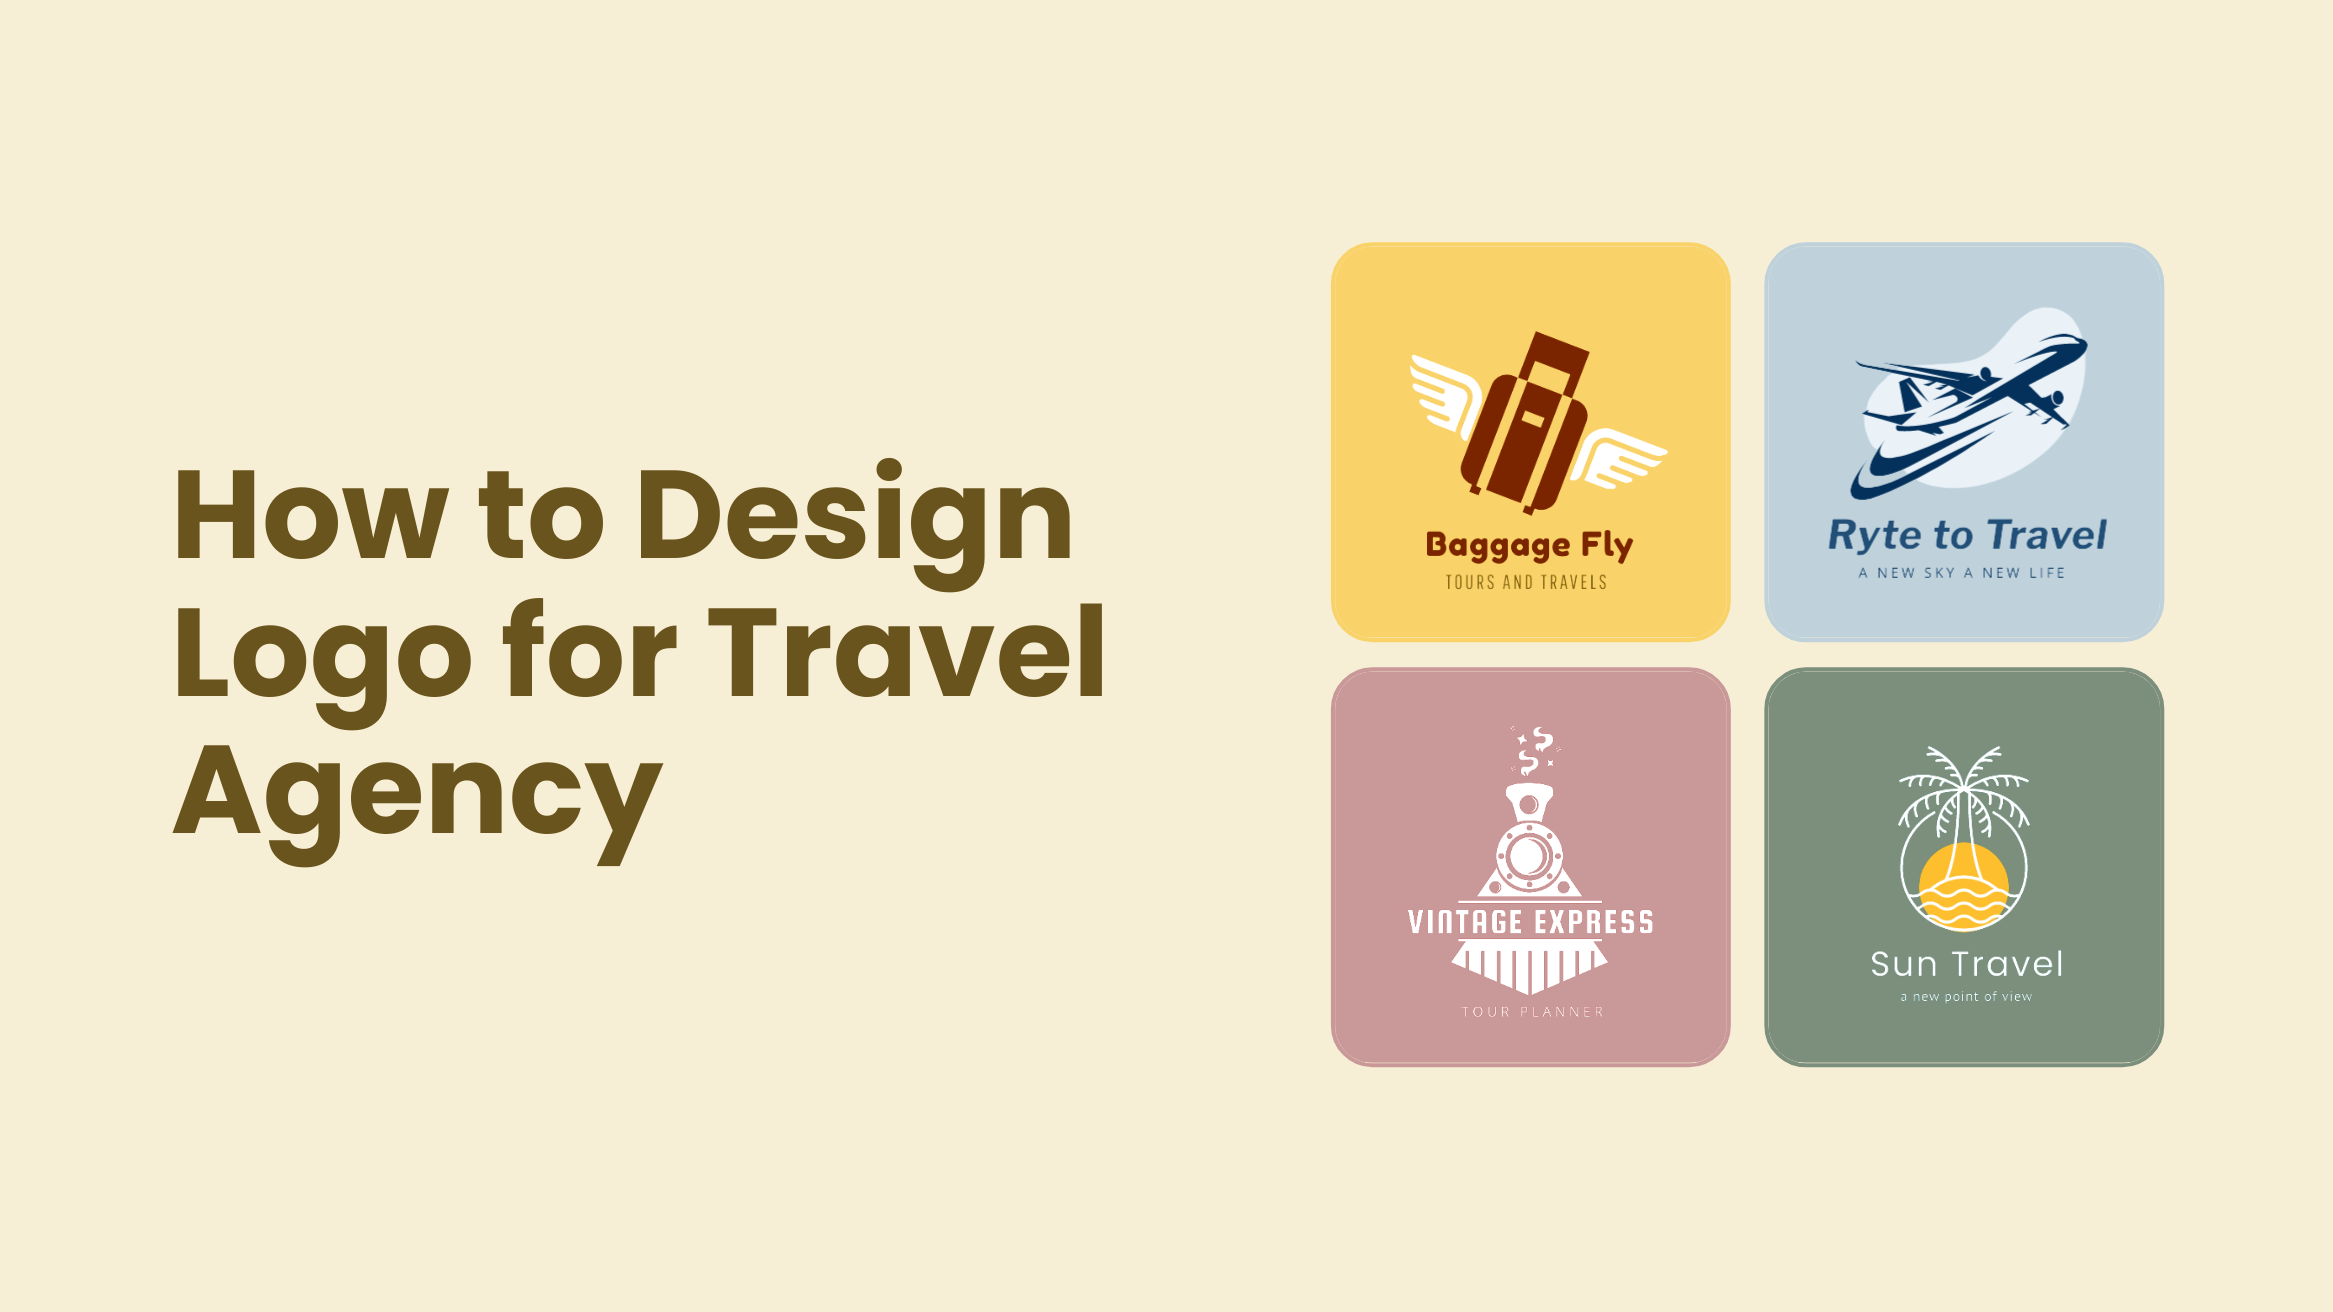 How to Design Logo for Travel Agency